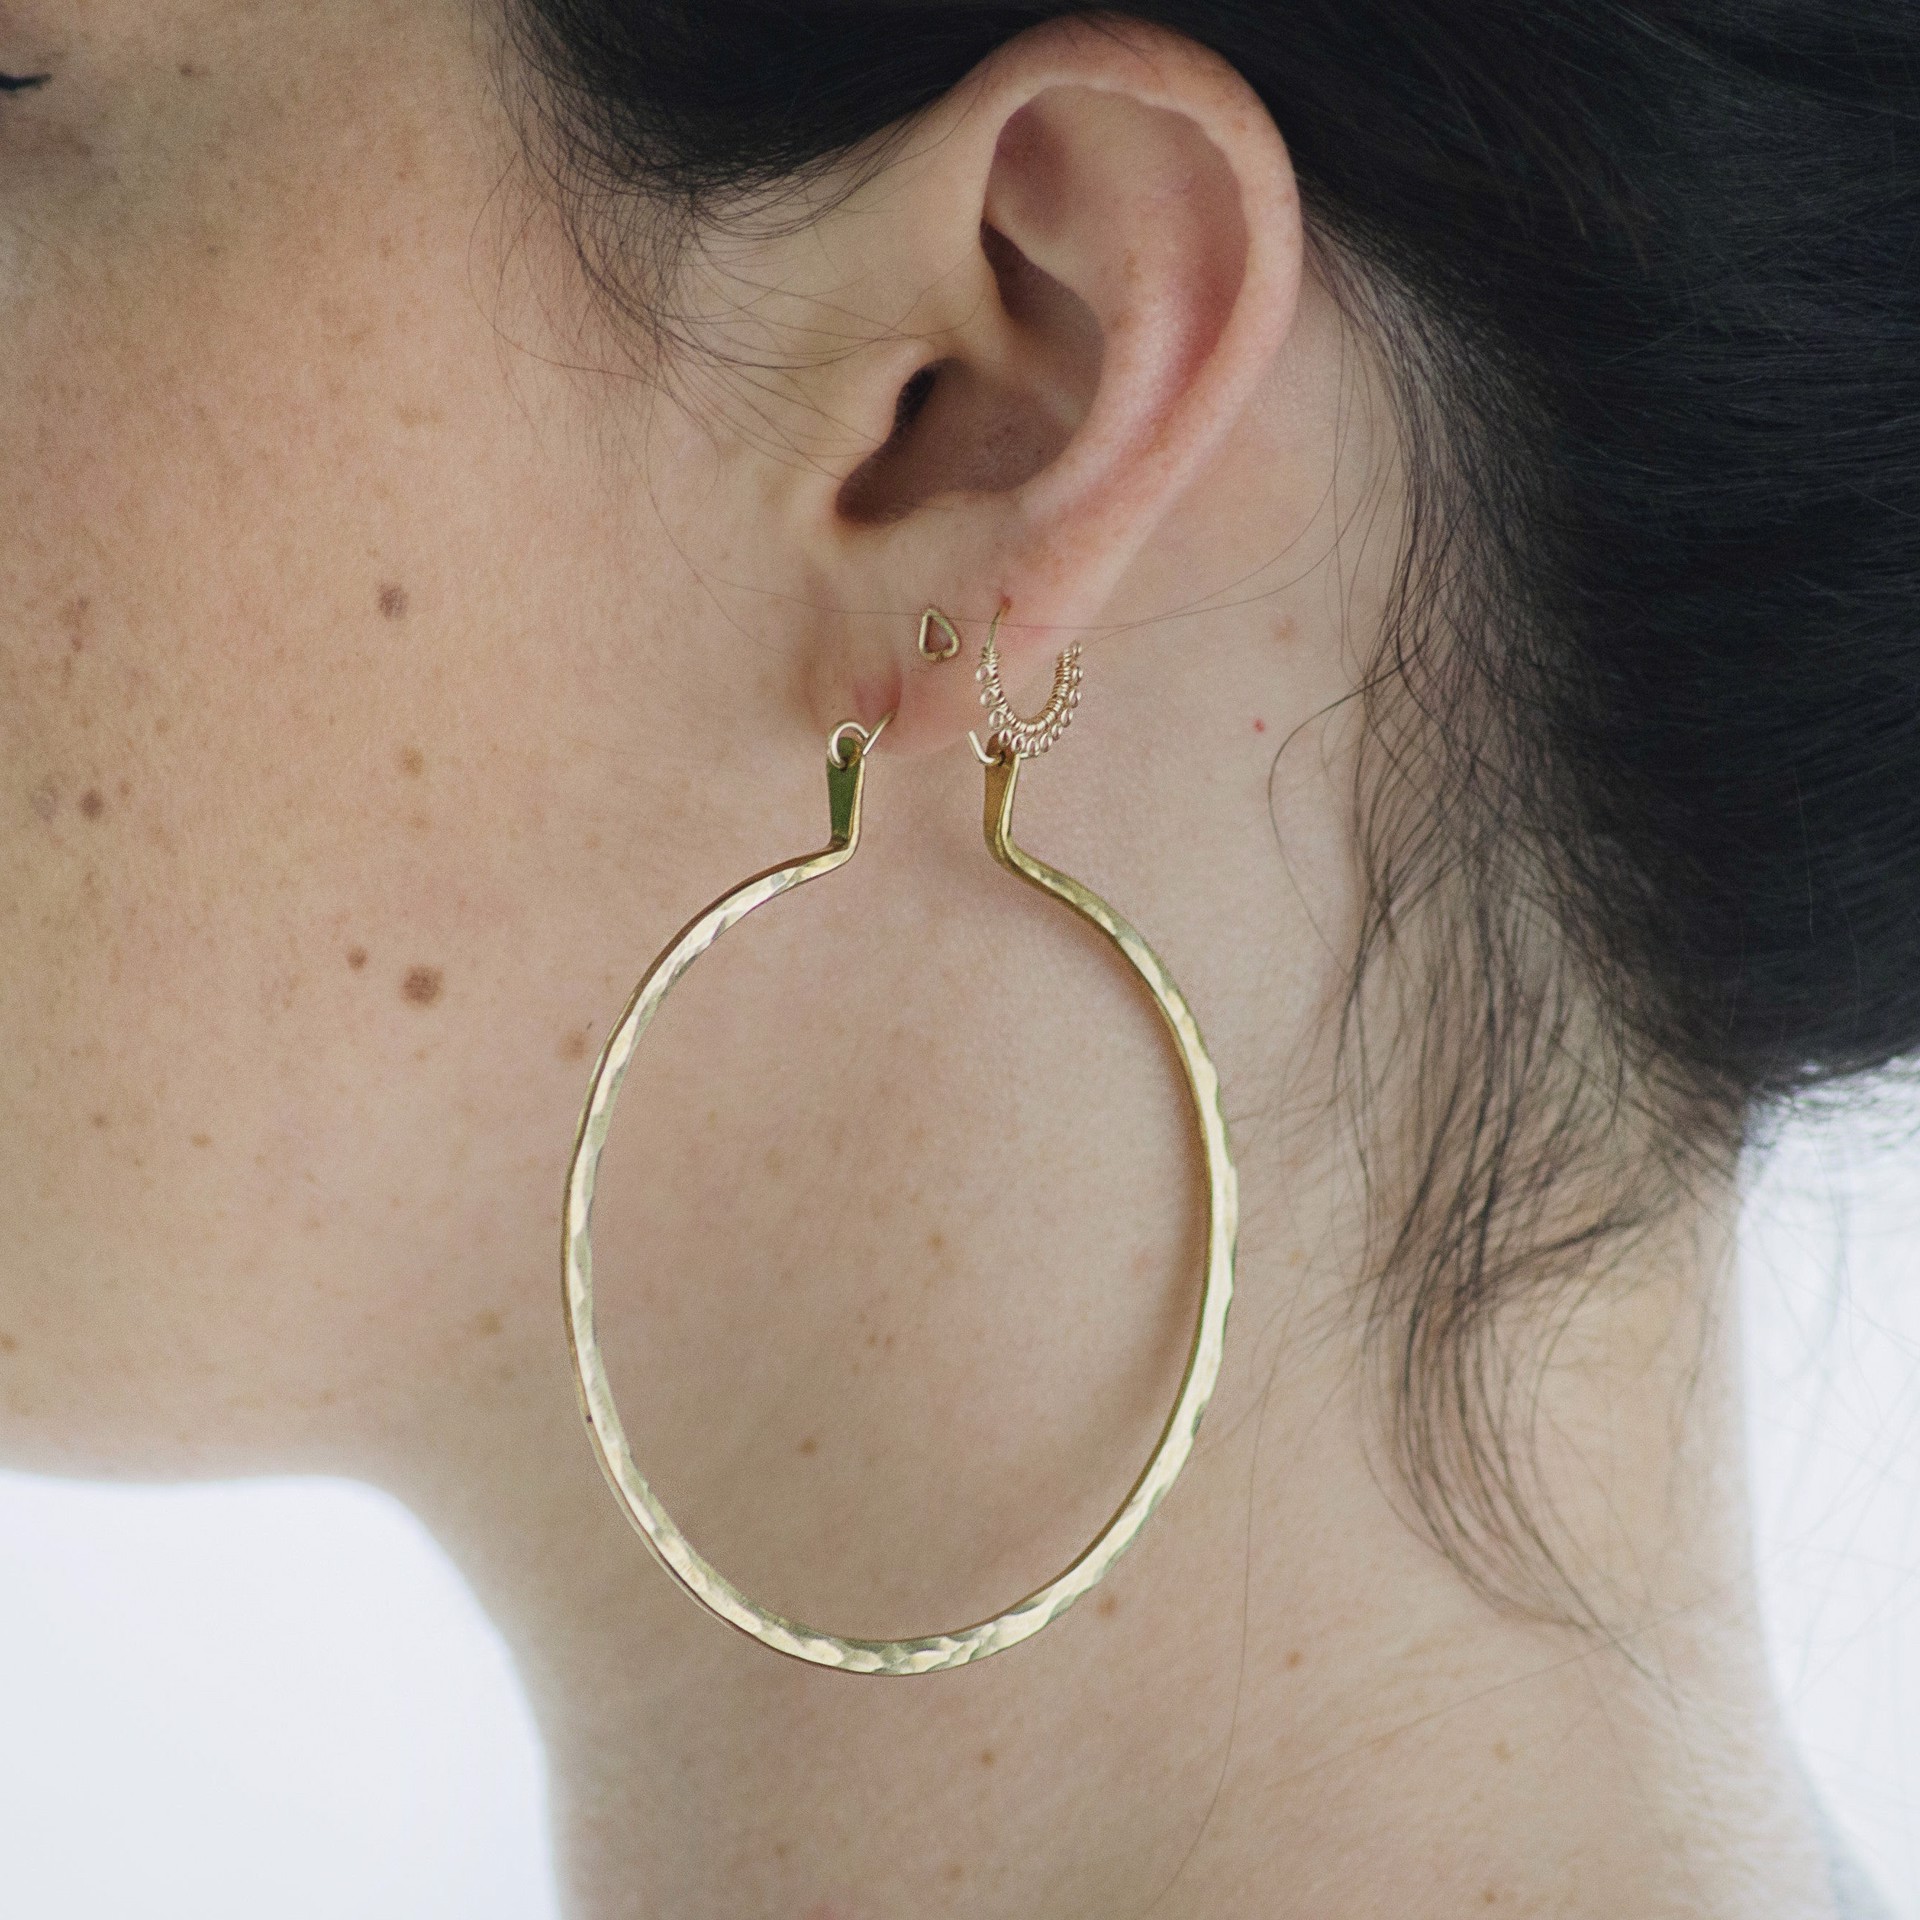 Forged Hoops in Brass - Large by Clementine & Co. Jewelry